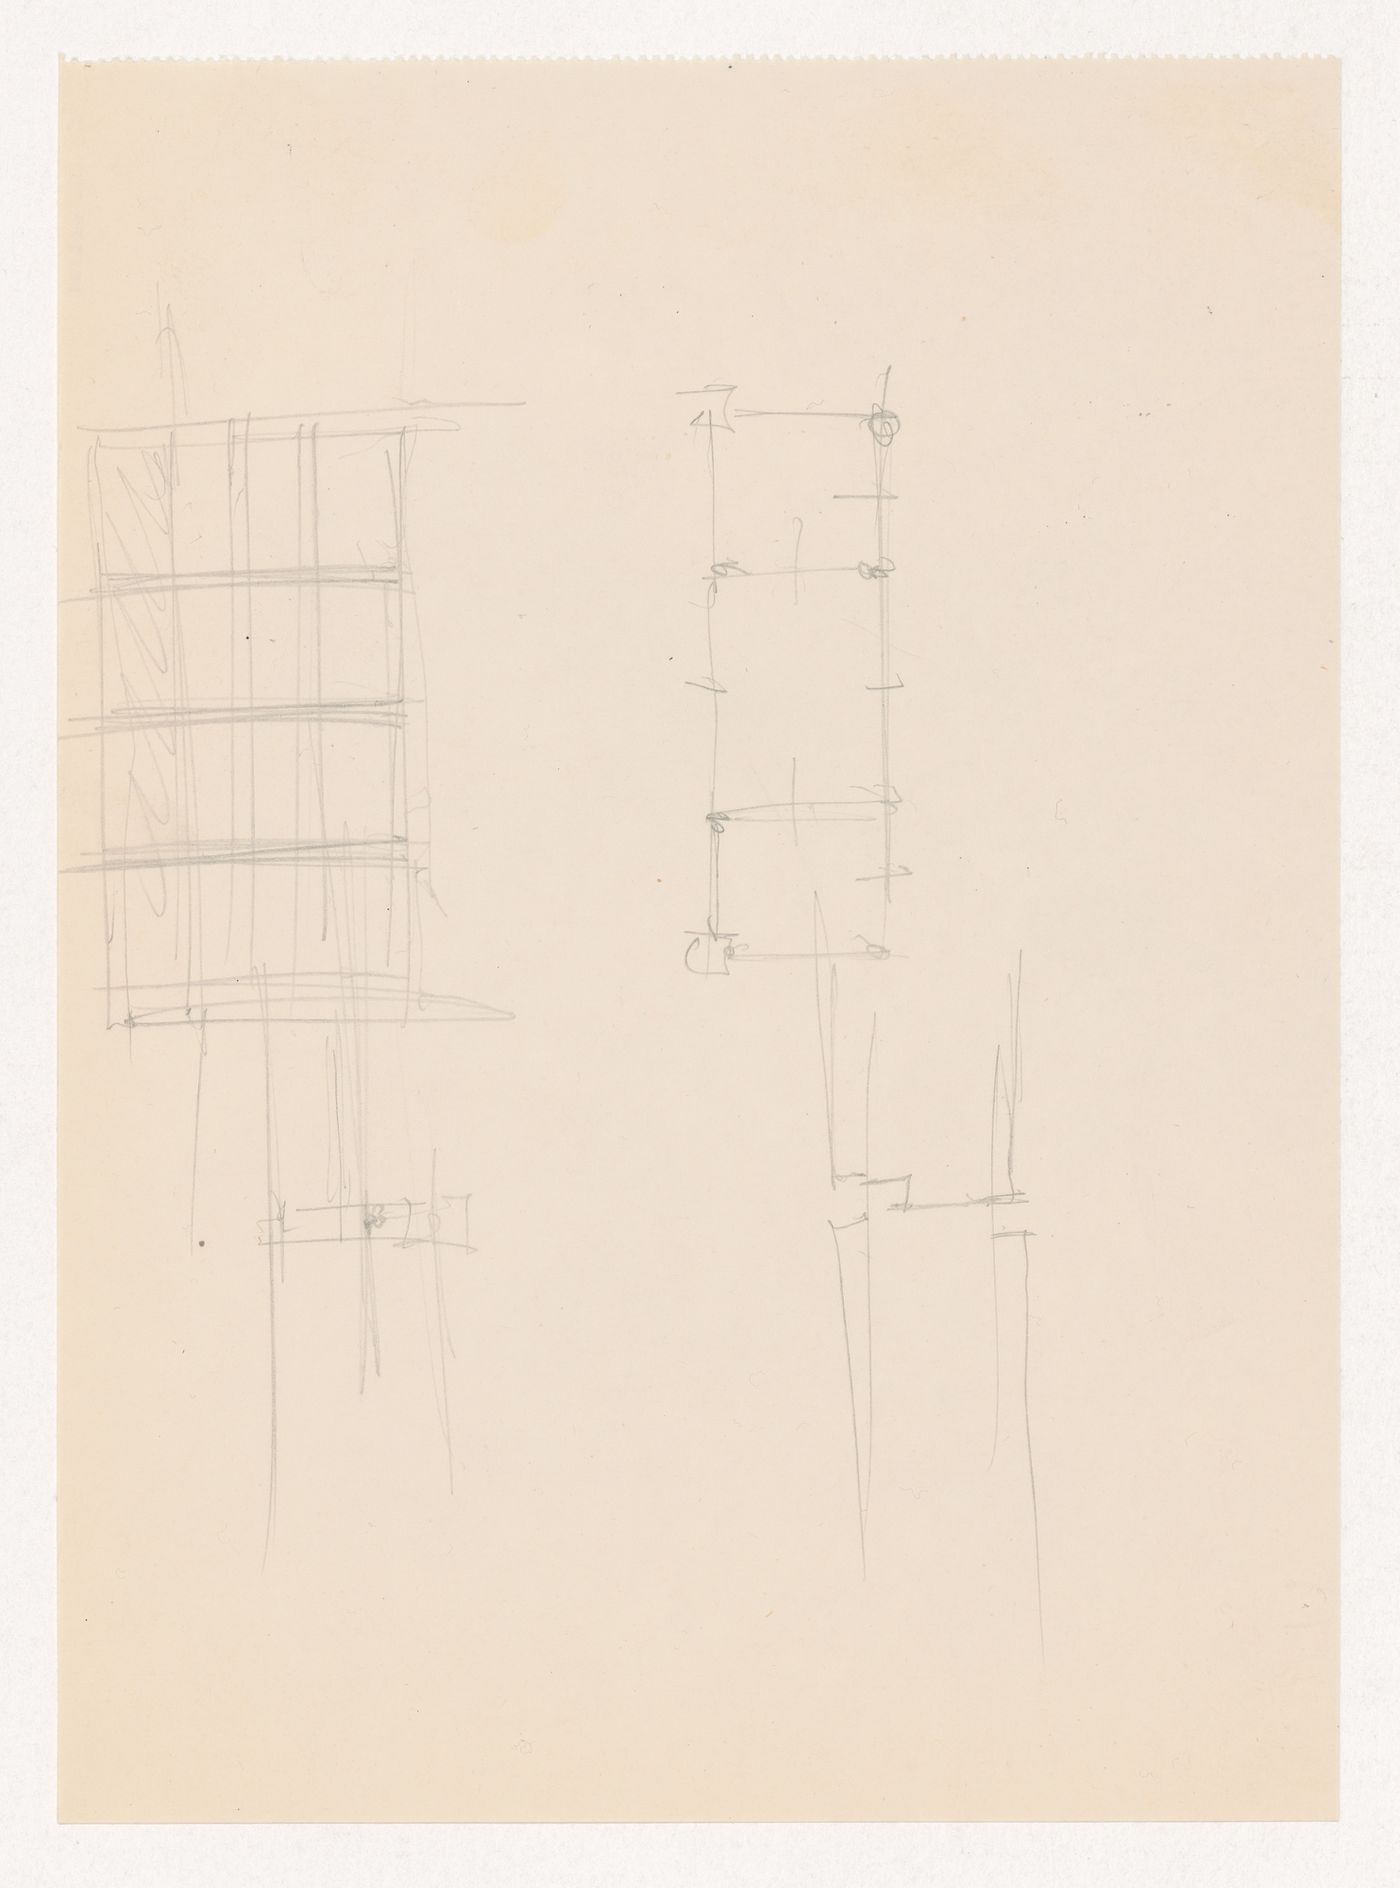 Partial sketch elevation for windows, partial sketch plan and sketch sectional details, probably for window mullions for the Metallurgy Building, Illinois Institute of Technology, Chicago